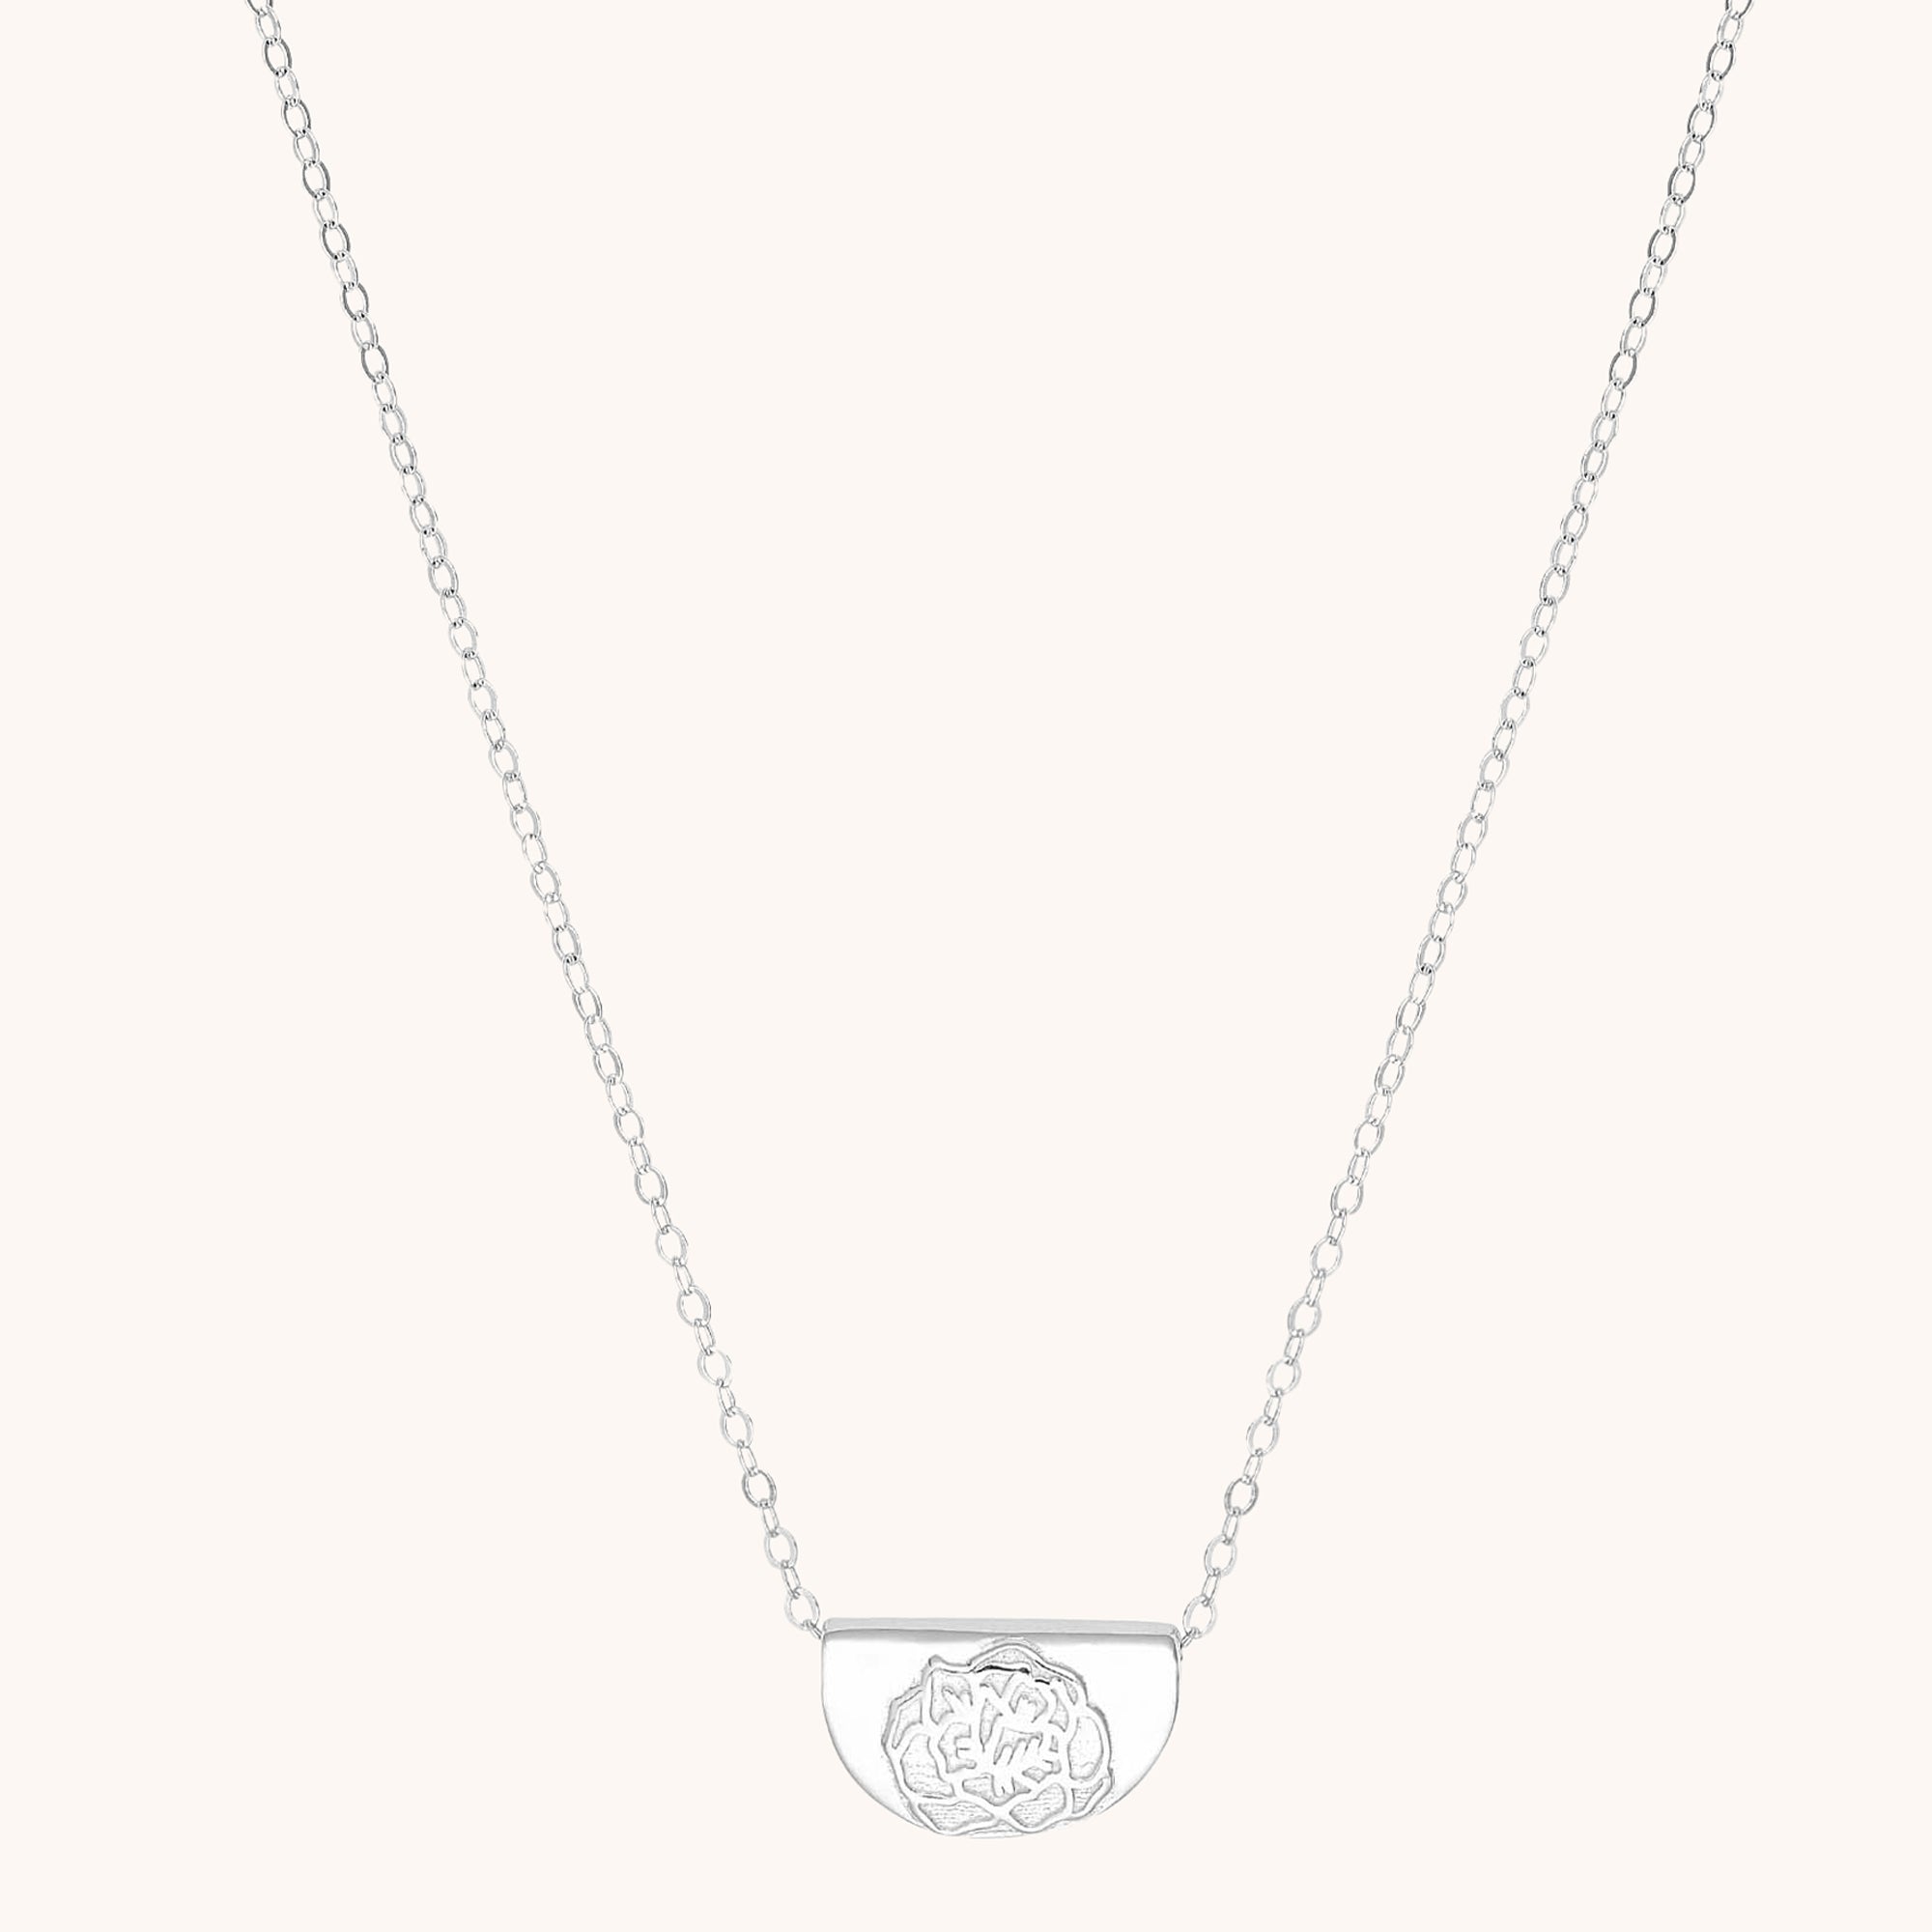 Birth Flower Necklace January (Carnation) Silver